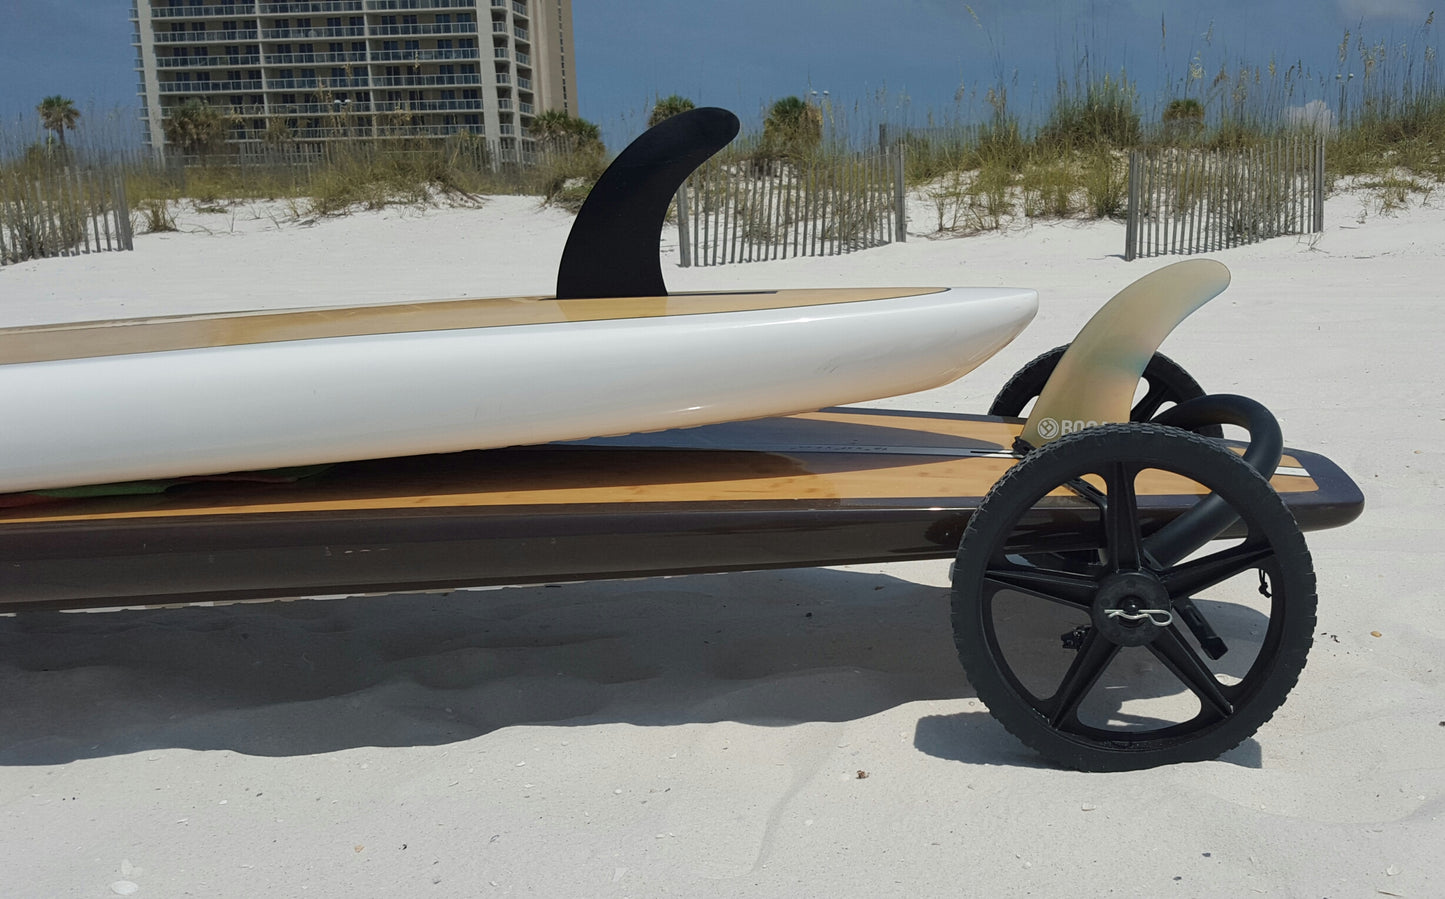 Cam Strap add on for the SUP Wheels | Beach Gear Holder